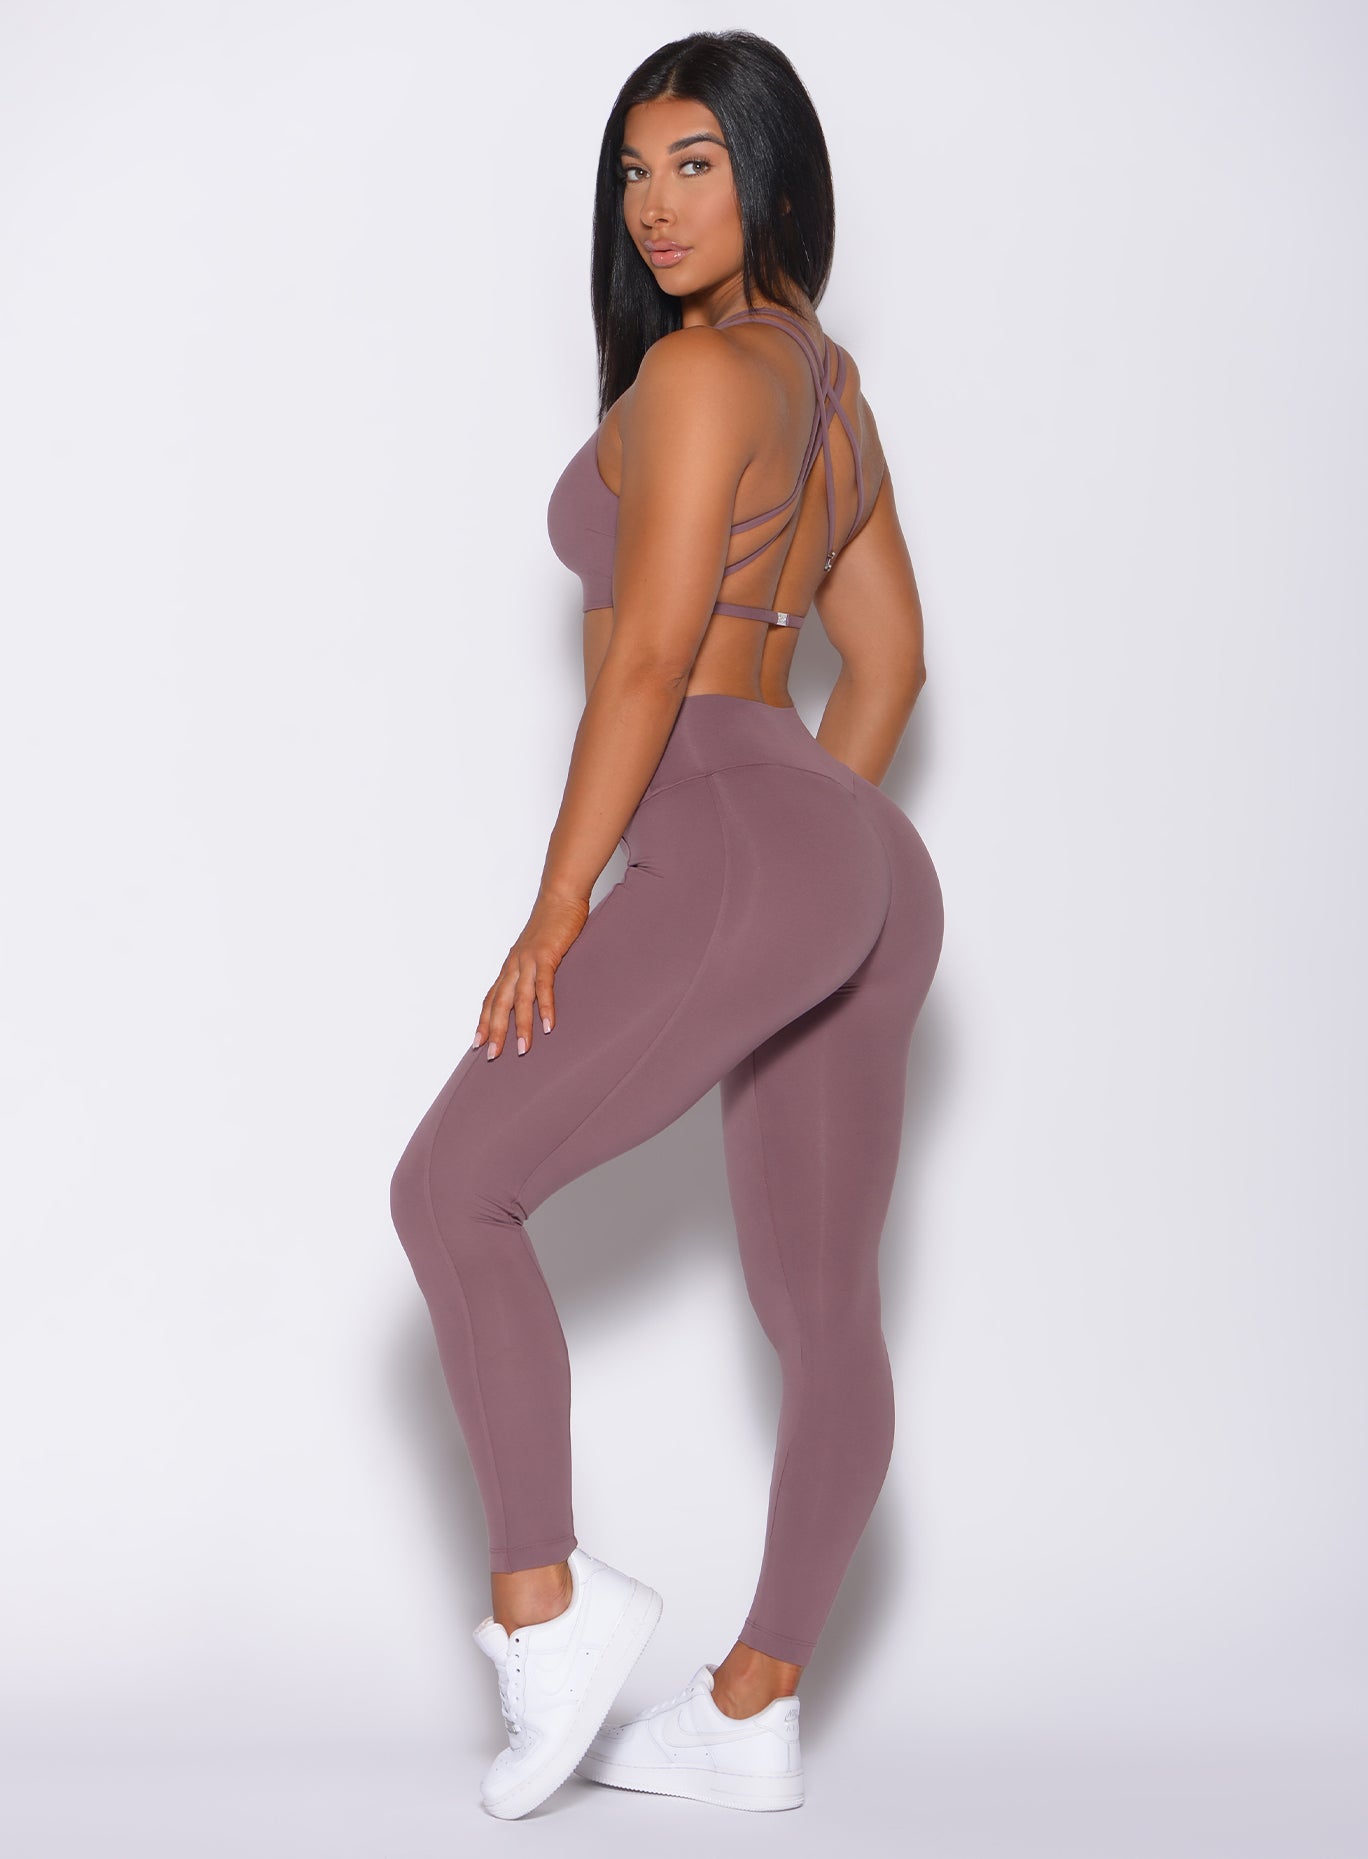 Left side profile view of a model facing to her left wearing our barbell legging in mauve color and a matching bra